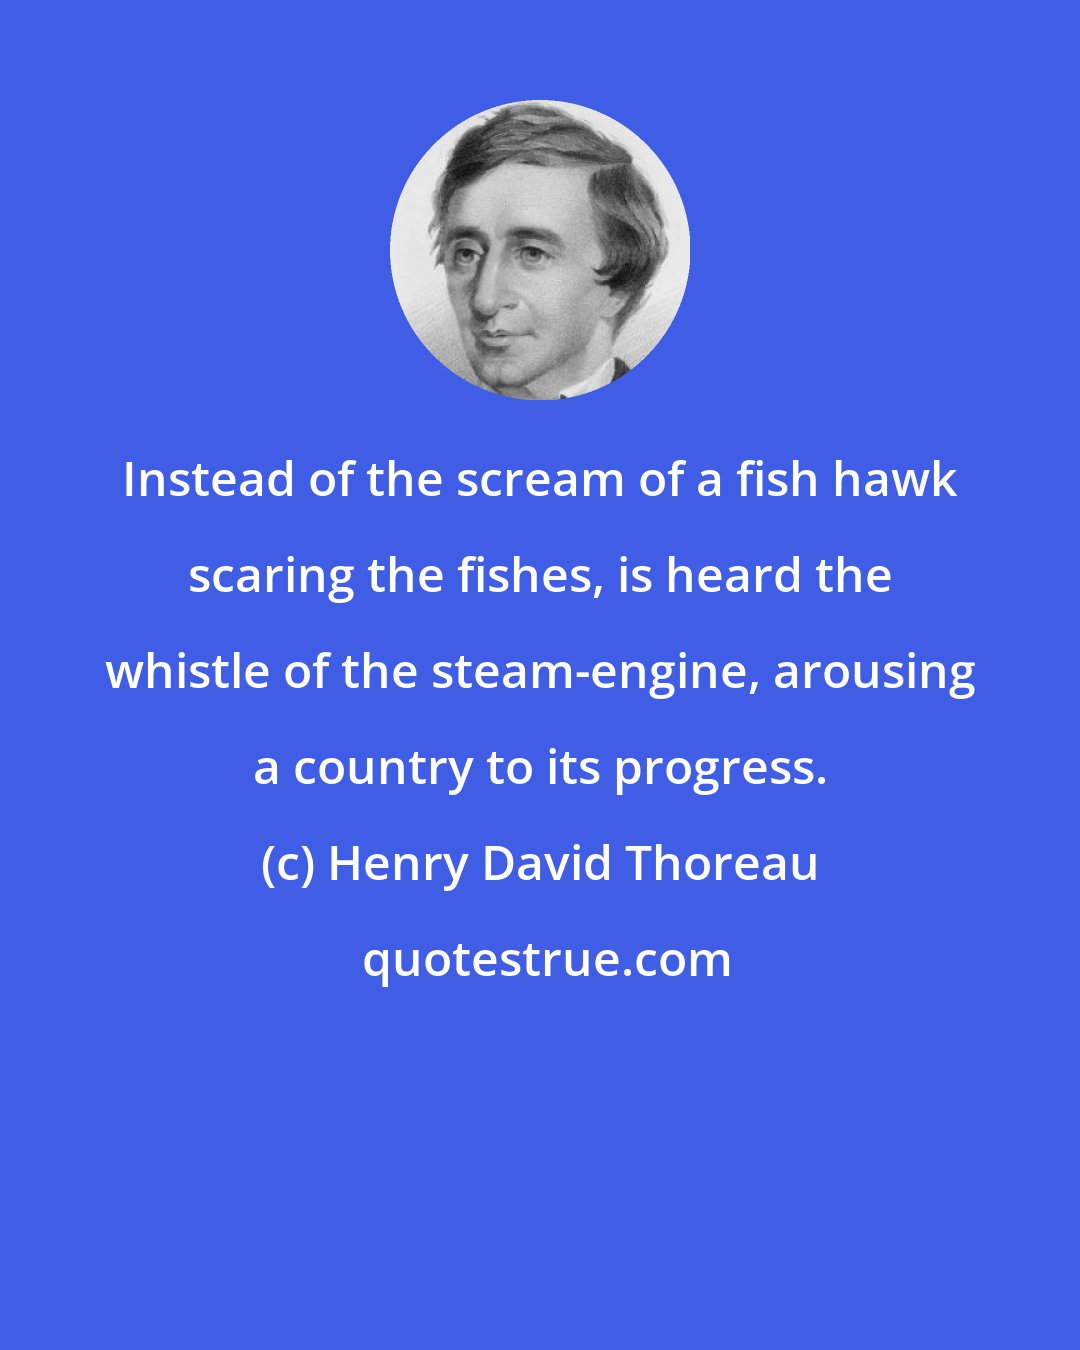 Henry David Thoreau: Instead of the scream of a fish hawk scaring the fishes, is heard the whistle of the steam-engine, arousing a country to its progress.